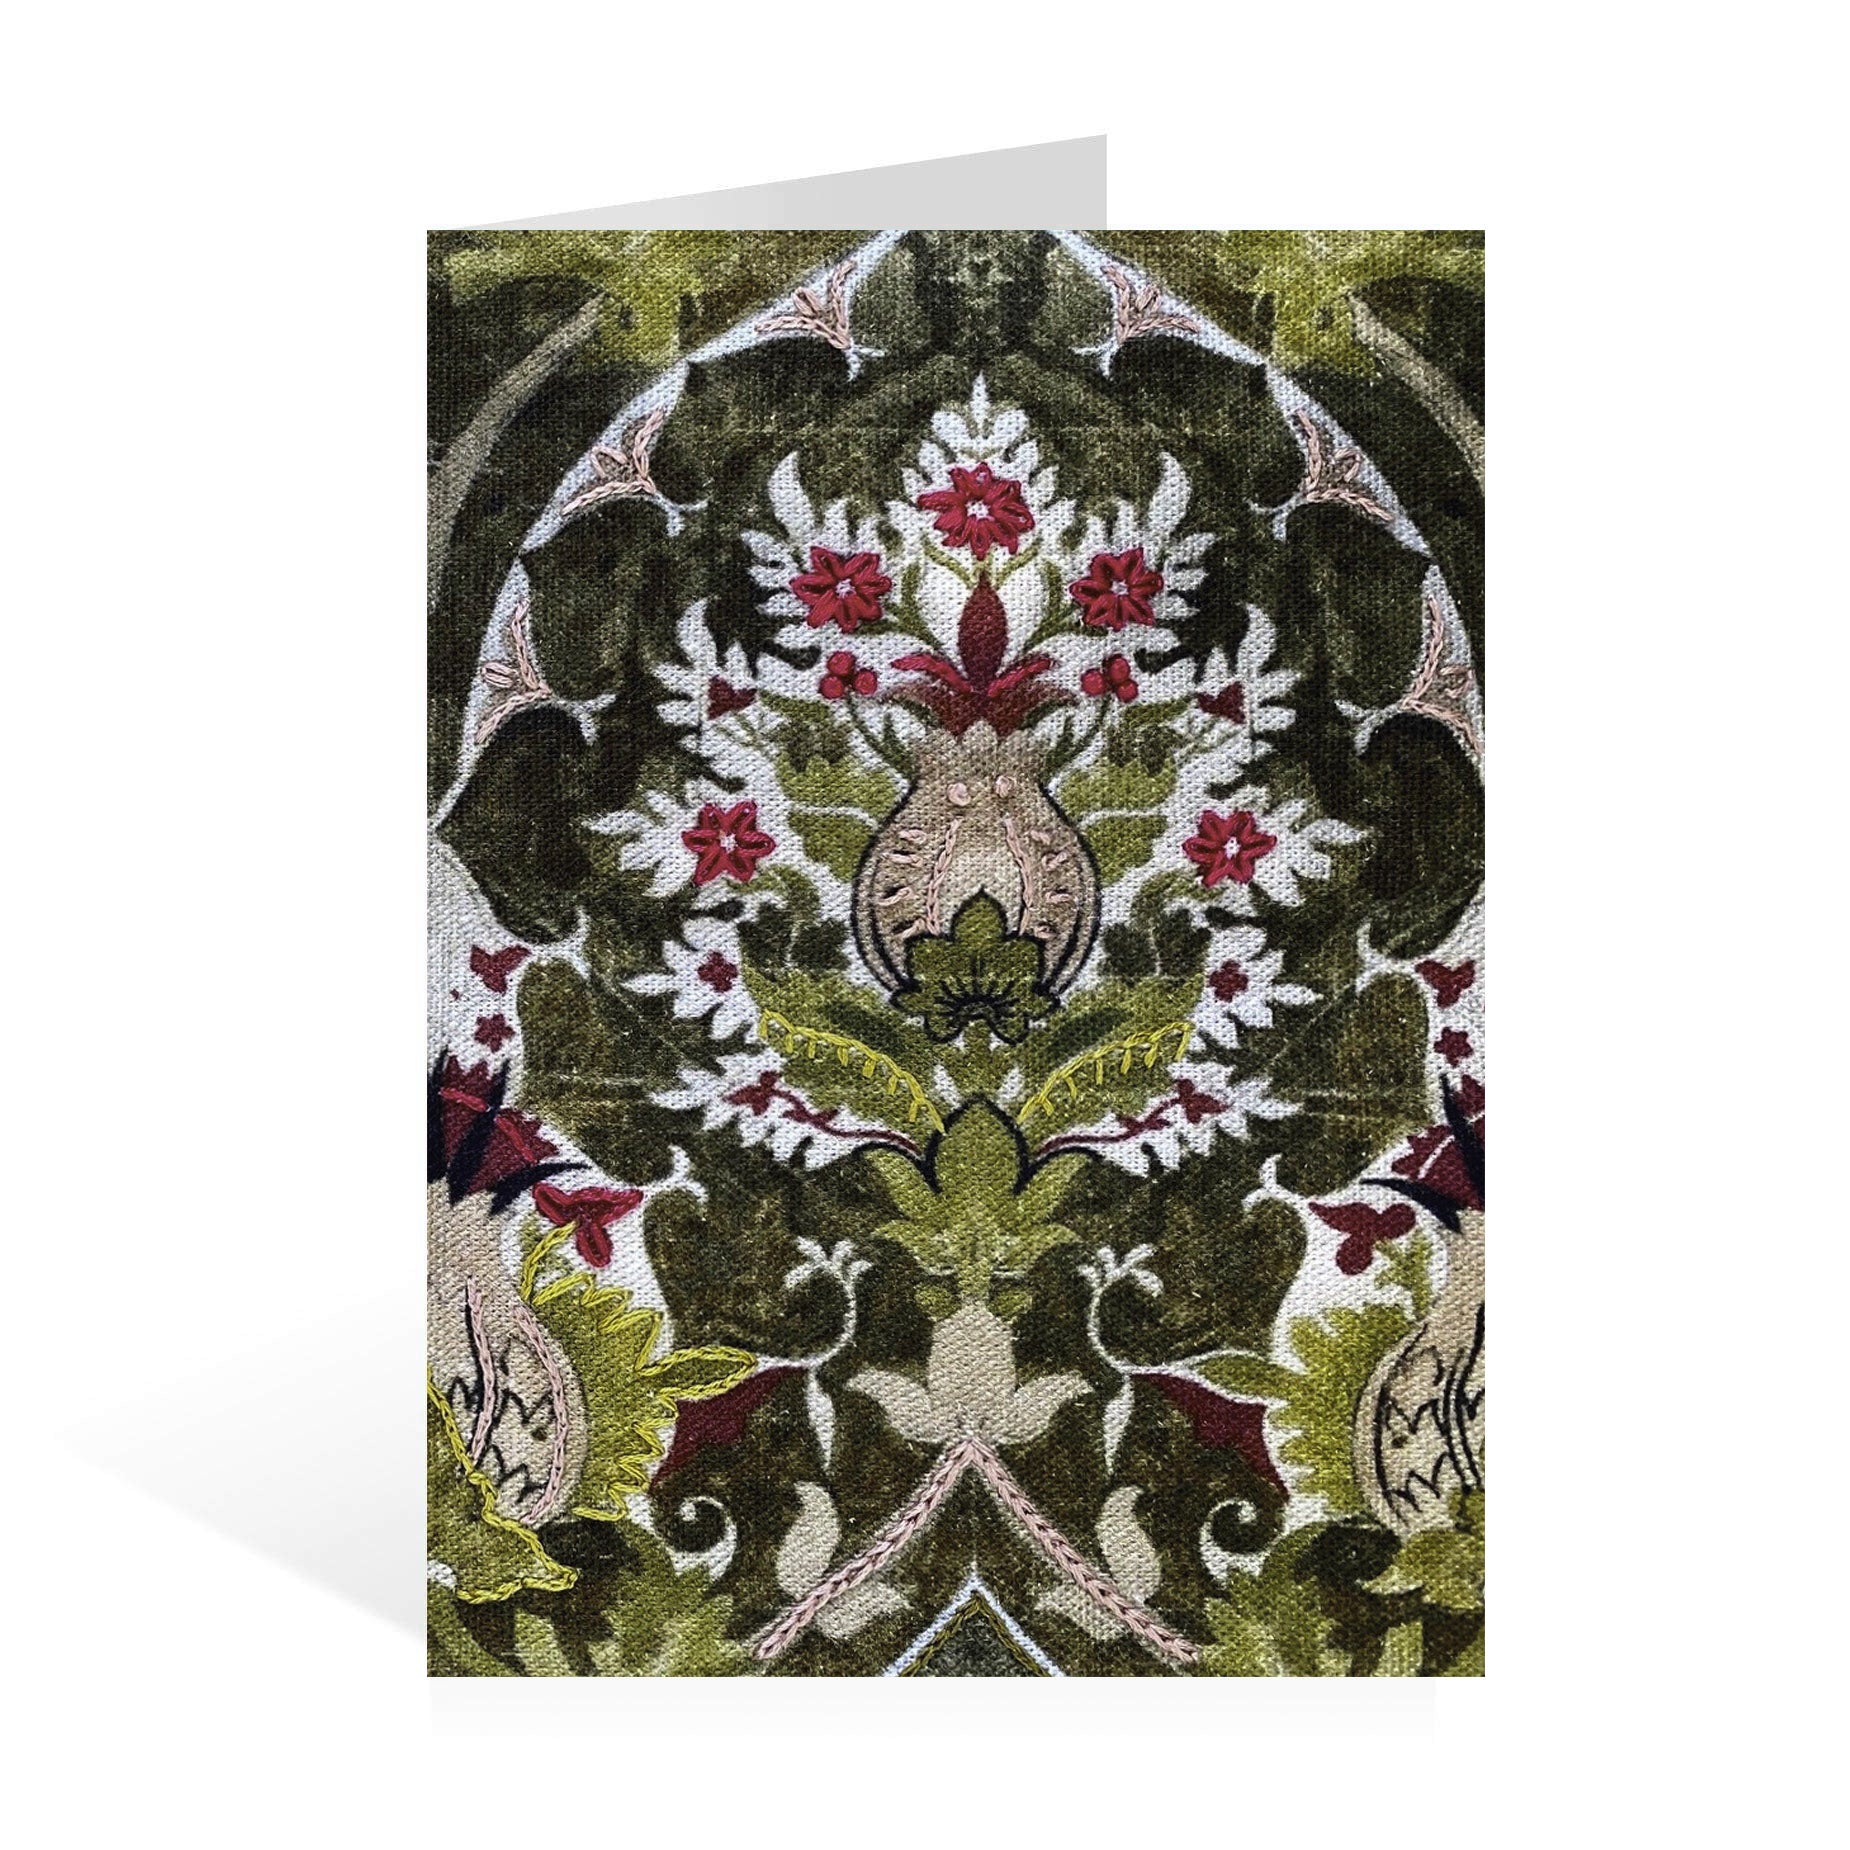 Fine-Cell-Work-charity-christmas-cards-pack-of-5-William-Morris.jpg